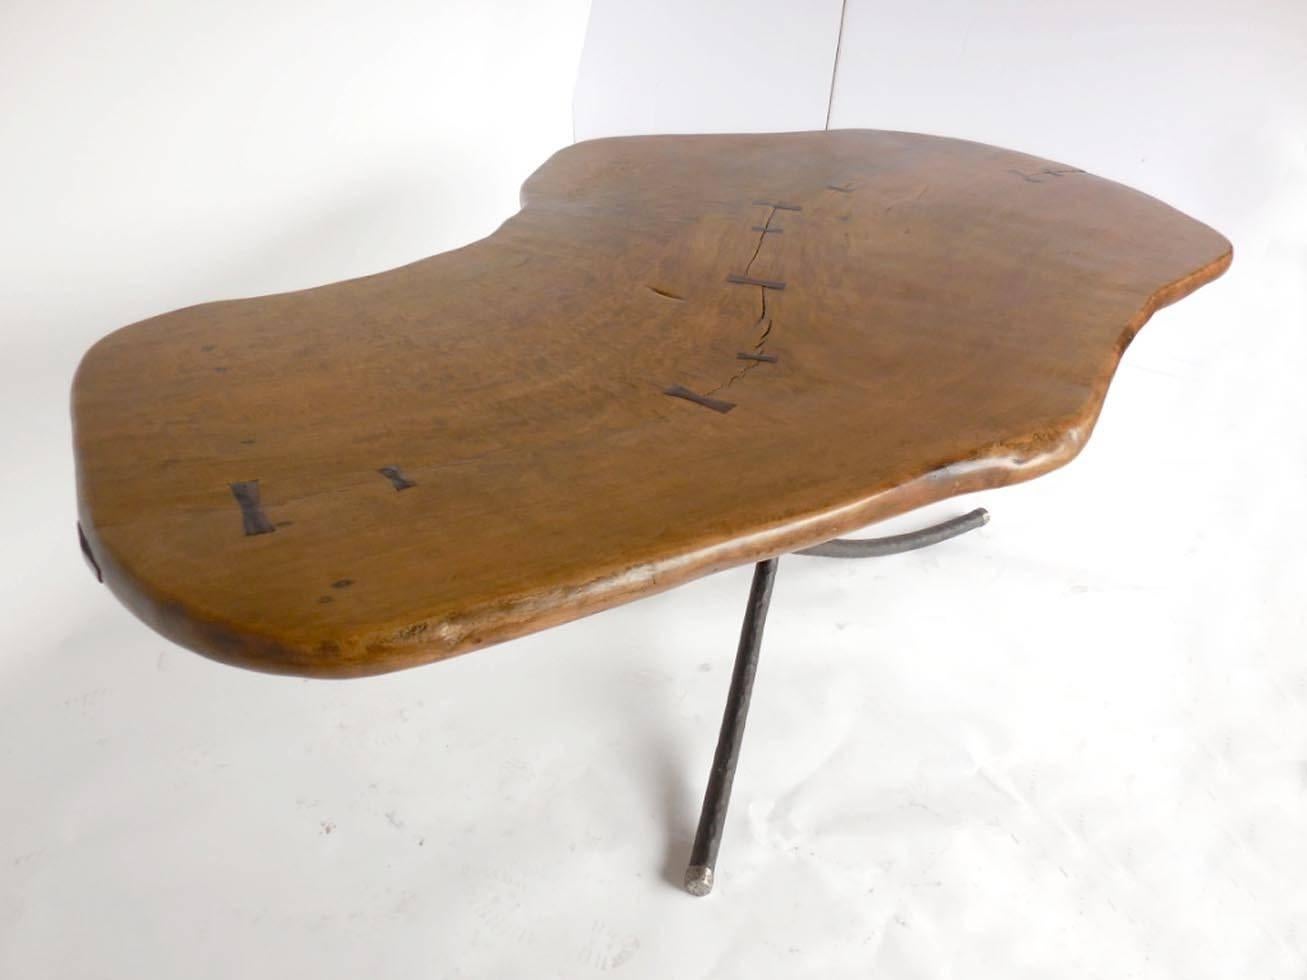 20th Century Primitive Modern Freeform Table  with Iron and Pewter Hand Forged Base Base